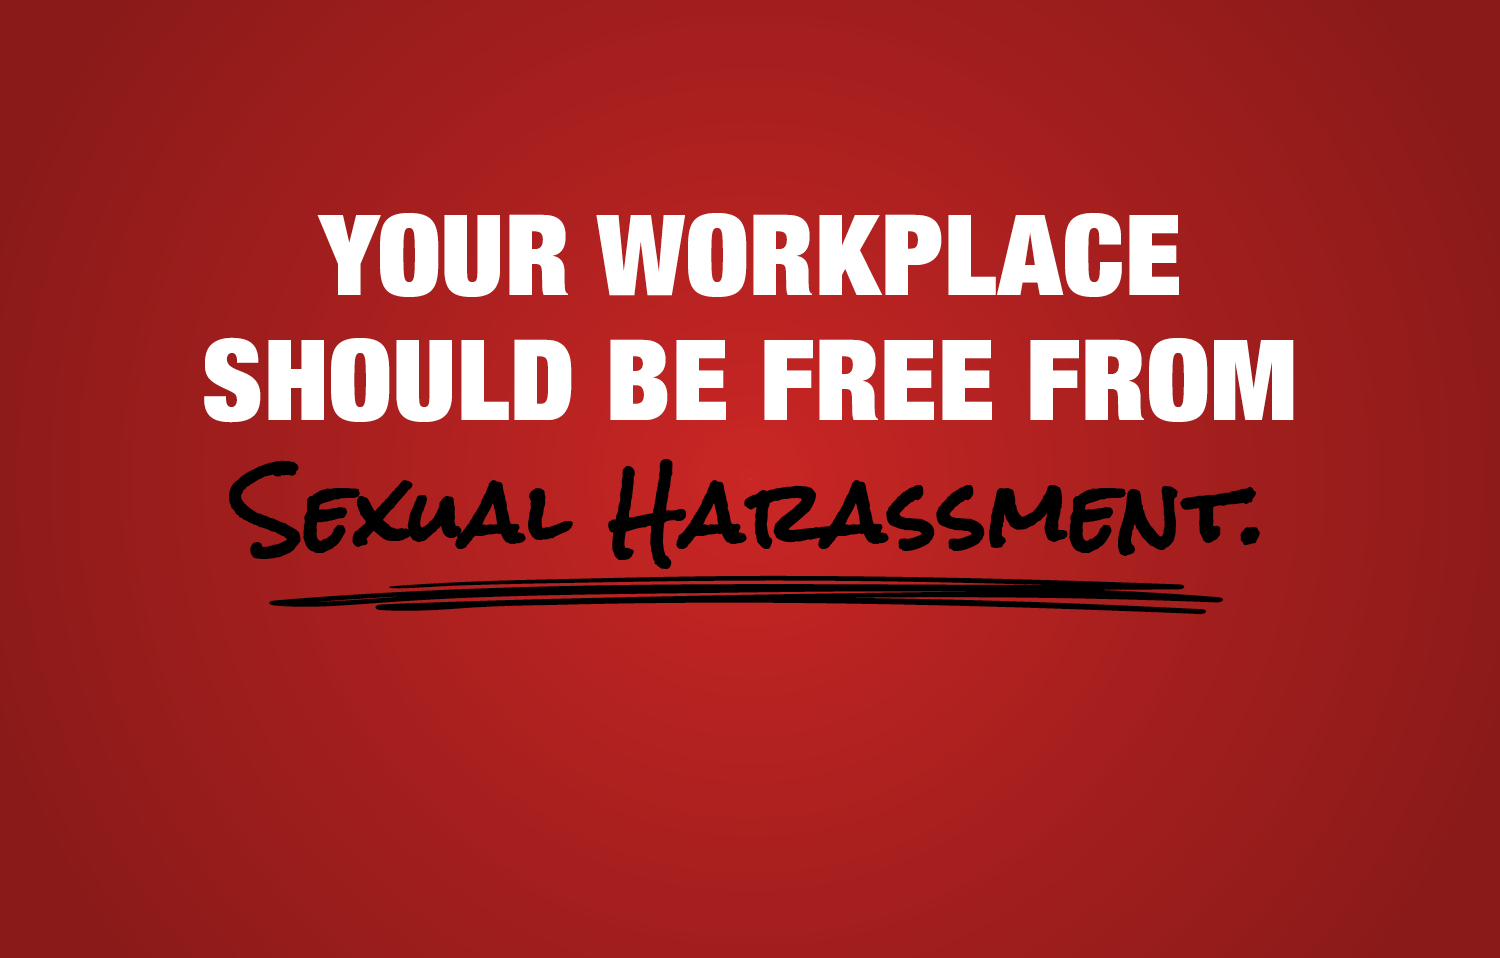 Providing Annual Sexual Harassment Prevention Training And Materials Artspool Help Center